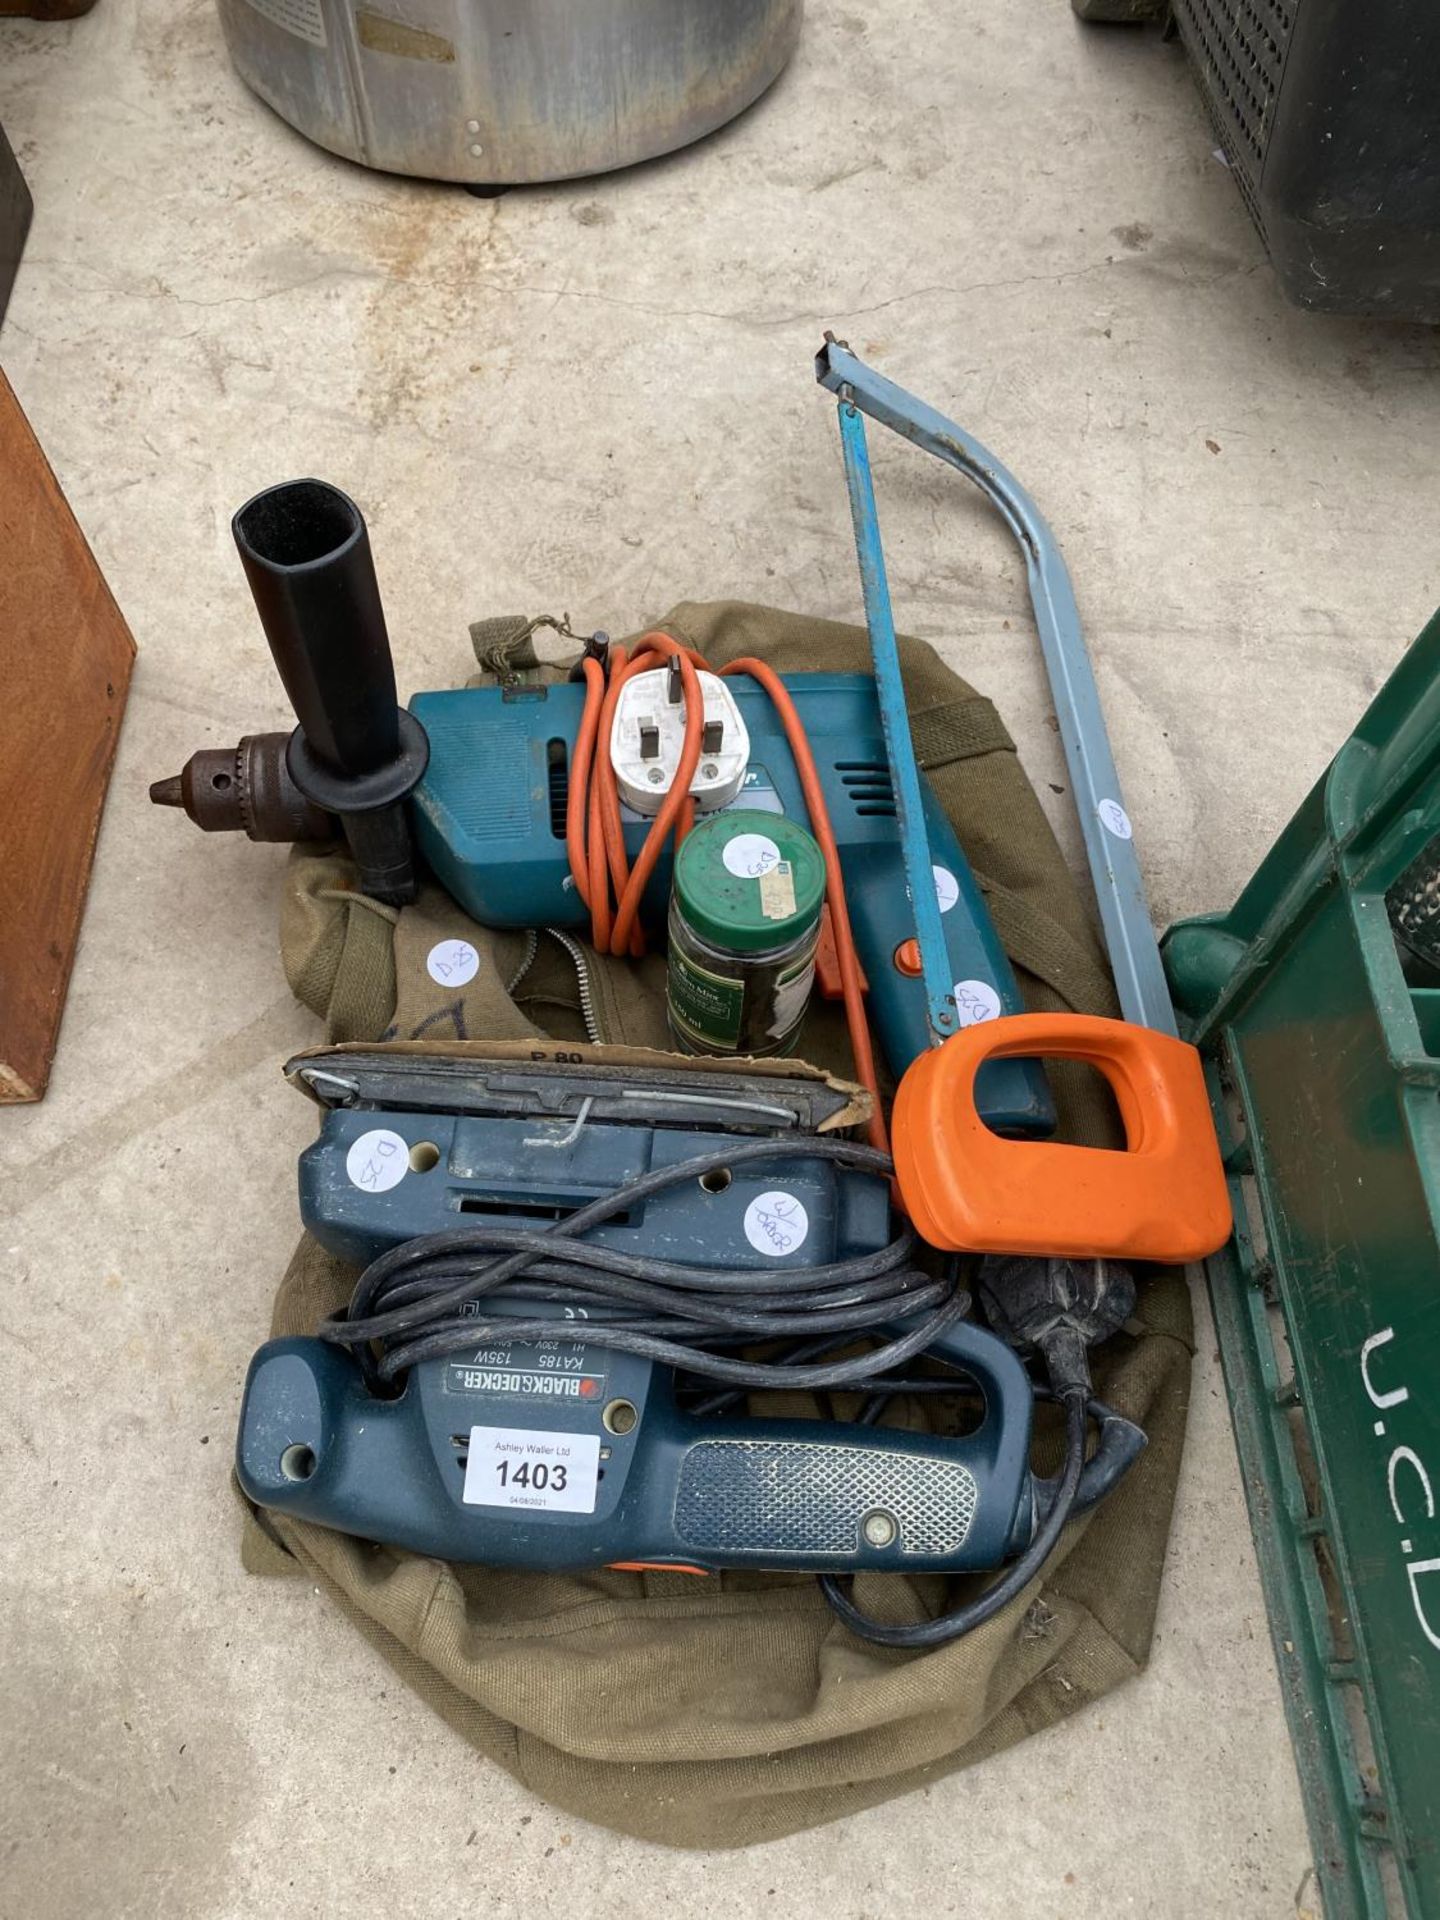 A BLACK AND DECKER SANDER, A BLACK AND DECKER DRILL BOTH BELIEVED WORKING ORDER BUT NO WARRANTY